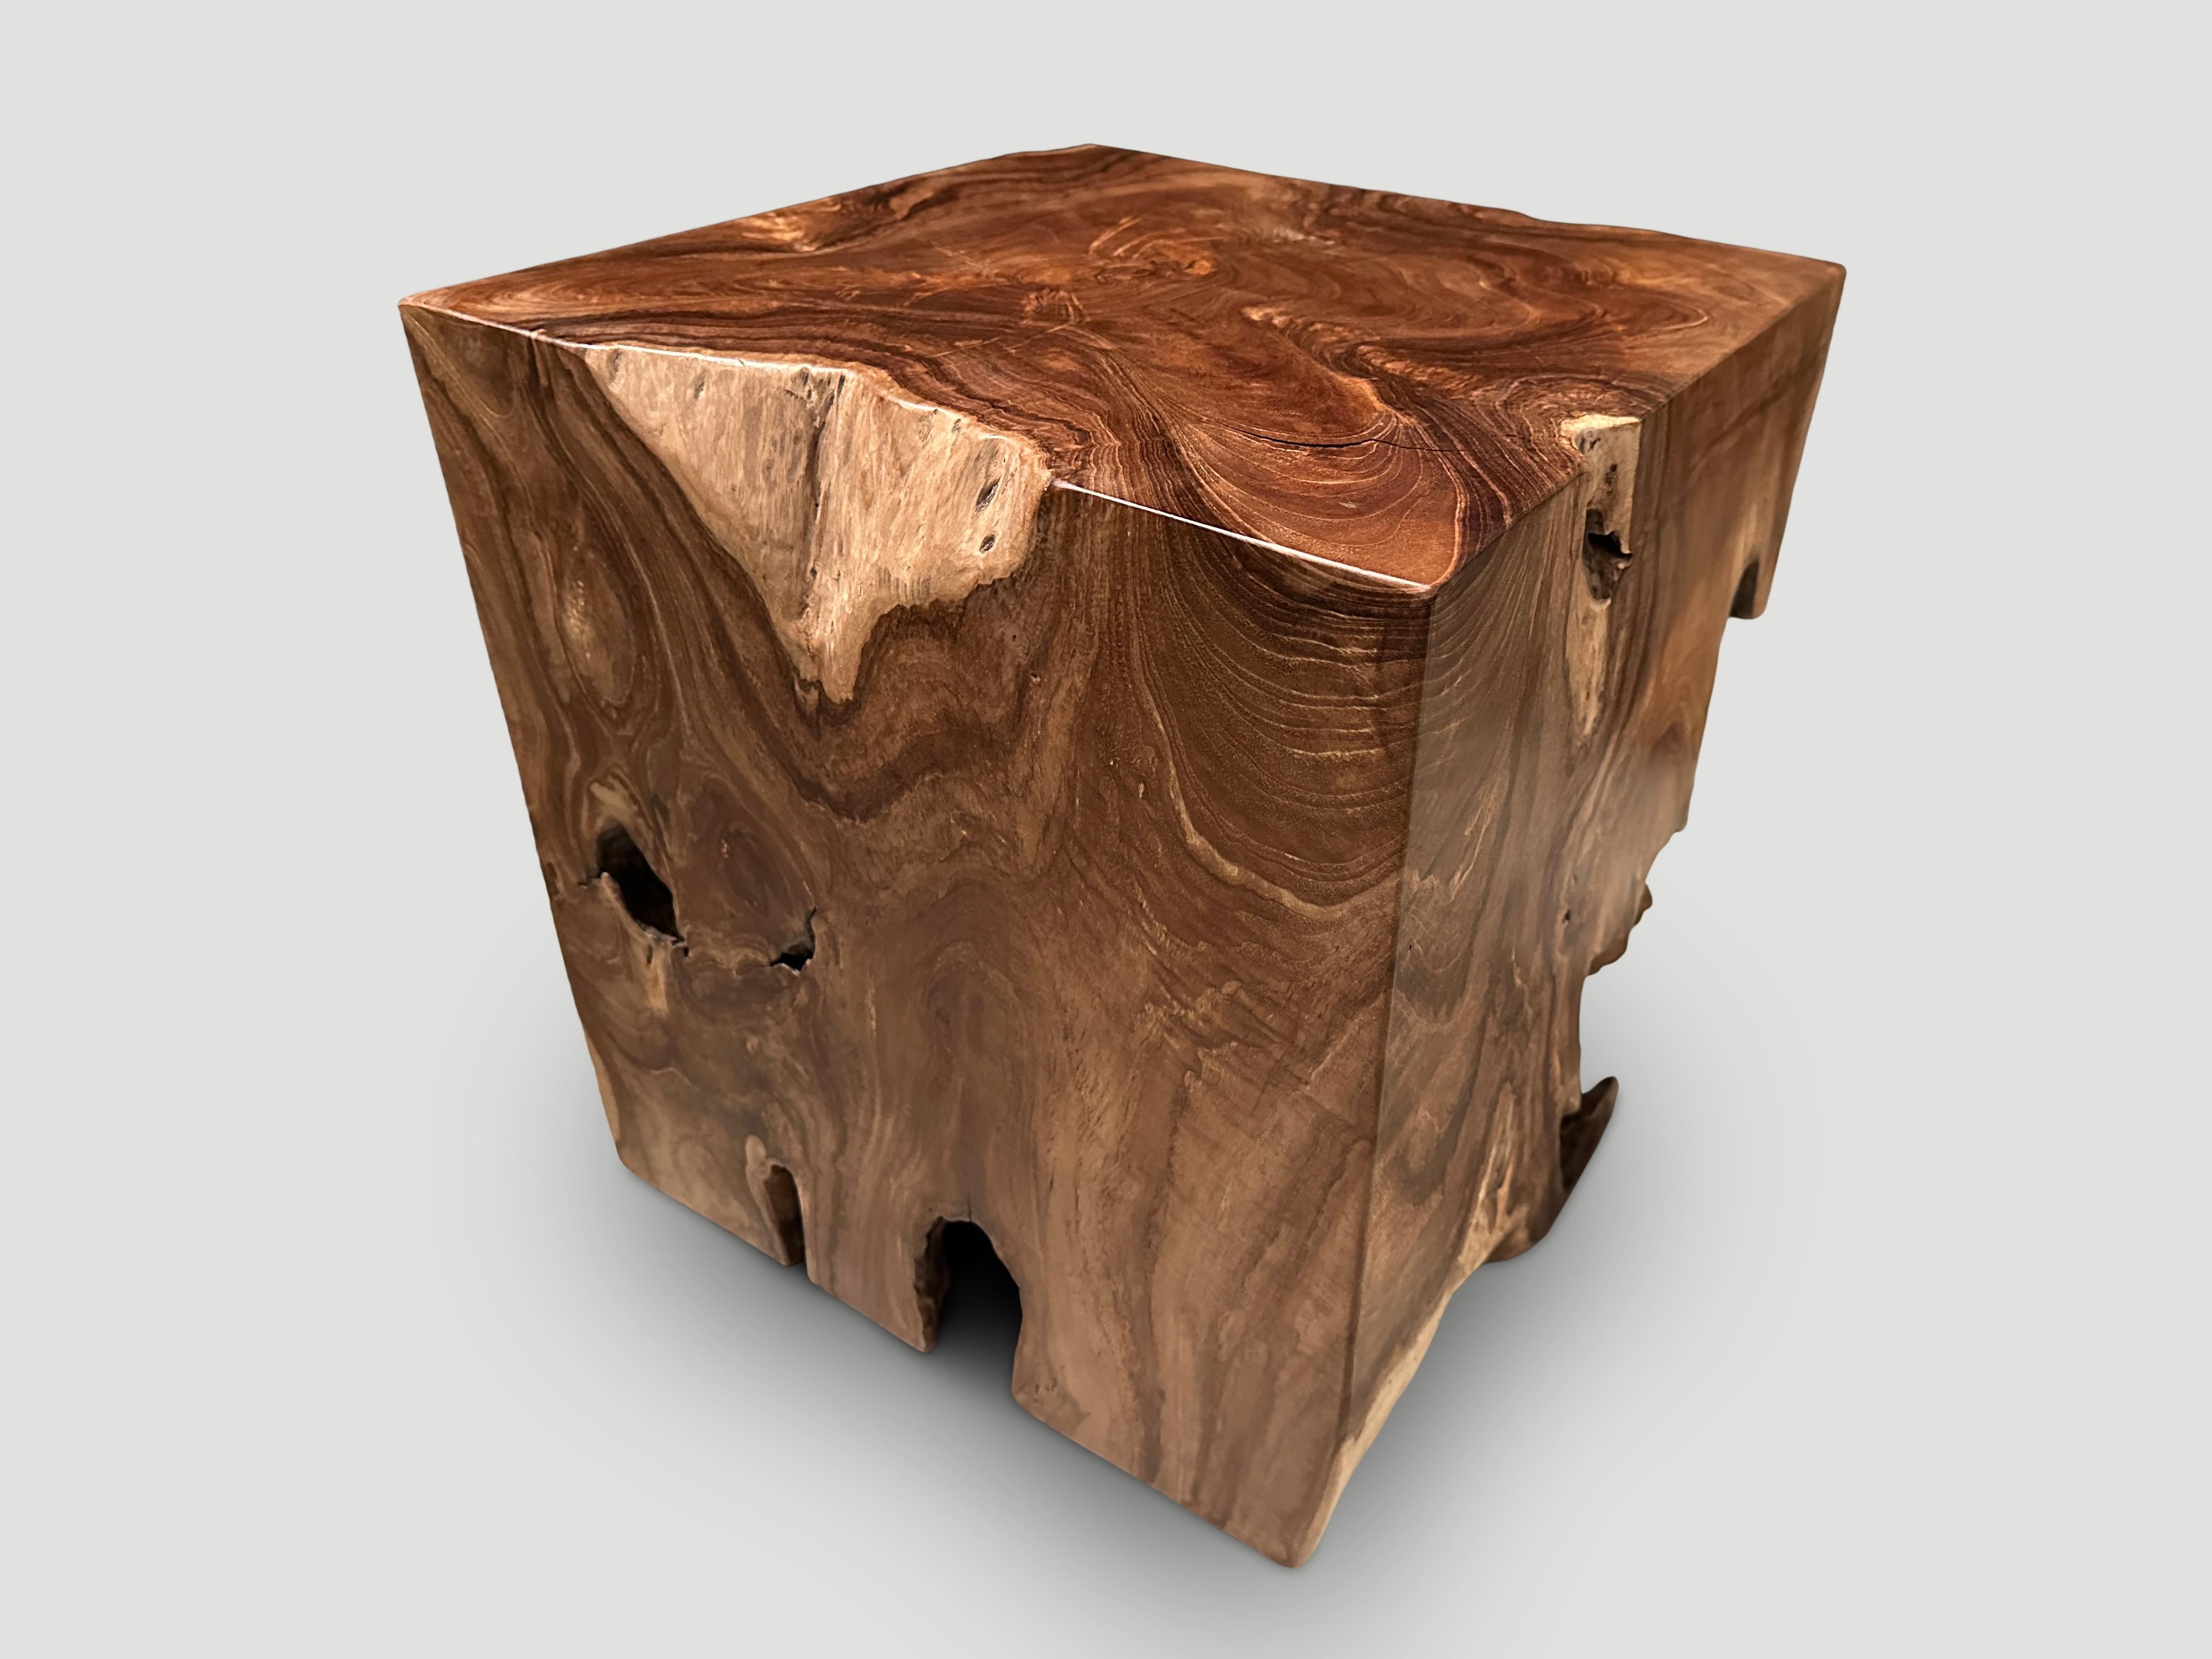 Organic single root reclaimed teak wood side table. Polished with a natural oil revealing the beautiful wood grain. Both usable and sculptural.

Own an Andrianna Shamaris original.

Andrianna Shamaris. The Leader In Modern Organic Design.